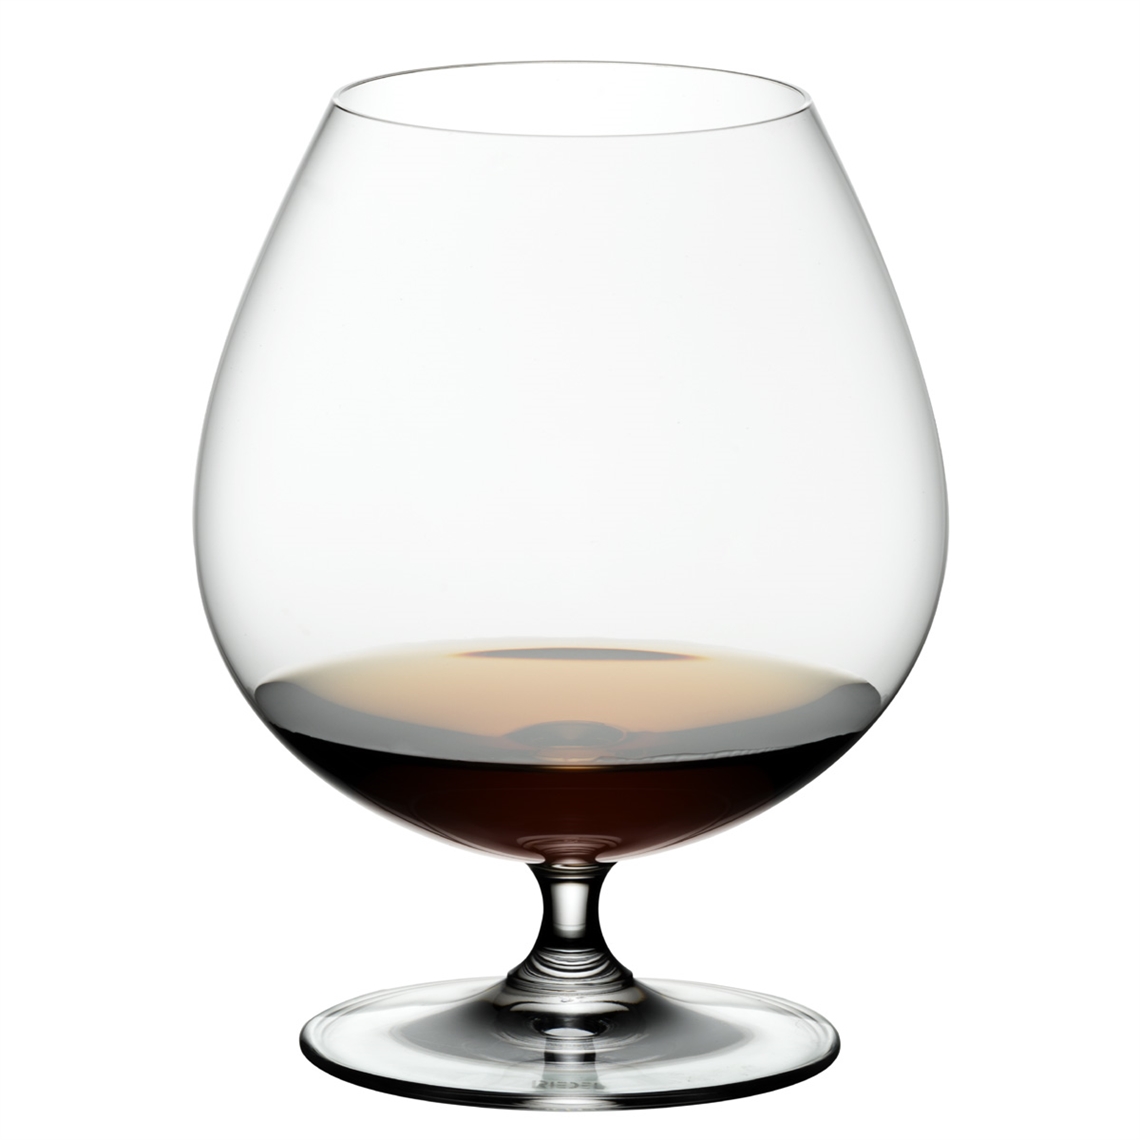 View more fortissimo from our Spirit Glasses range